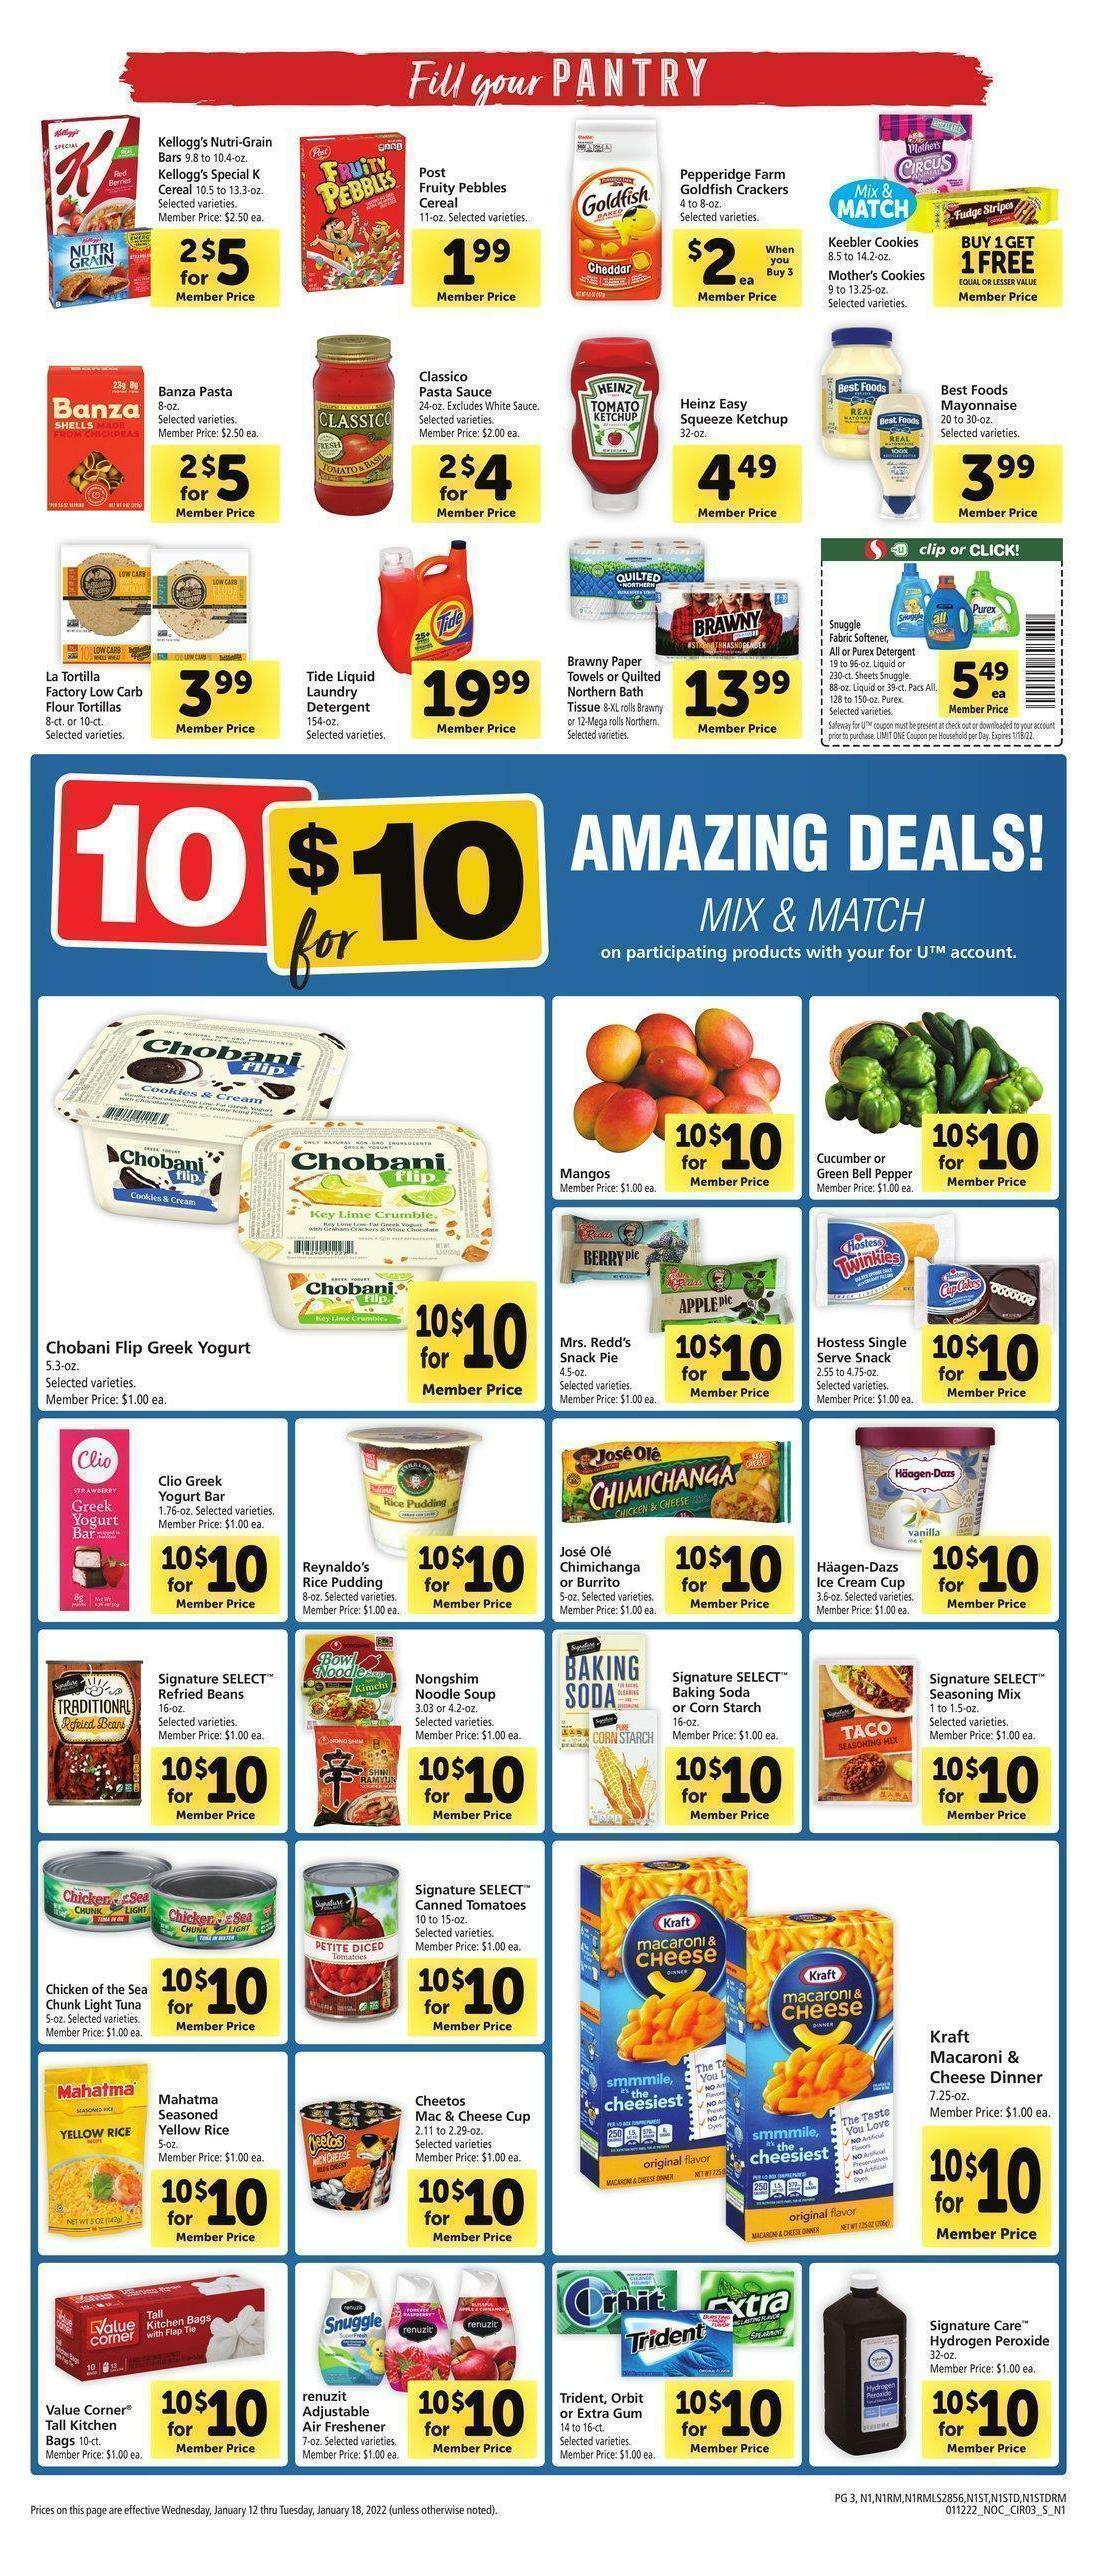 Safeway Weekly Ad from January 12